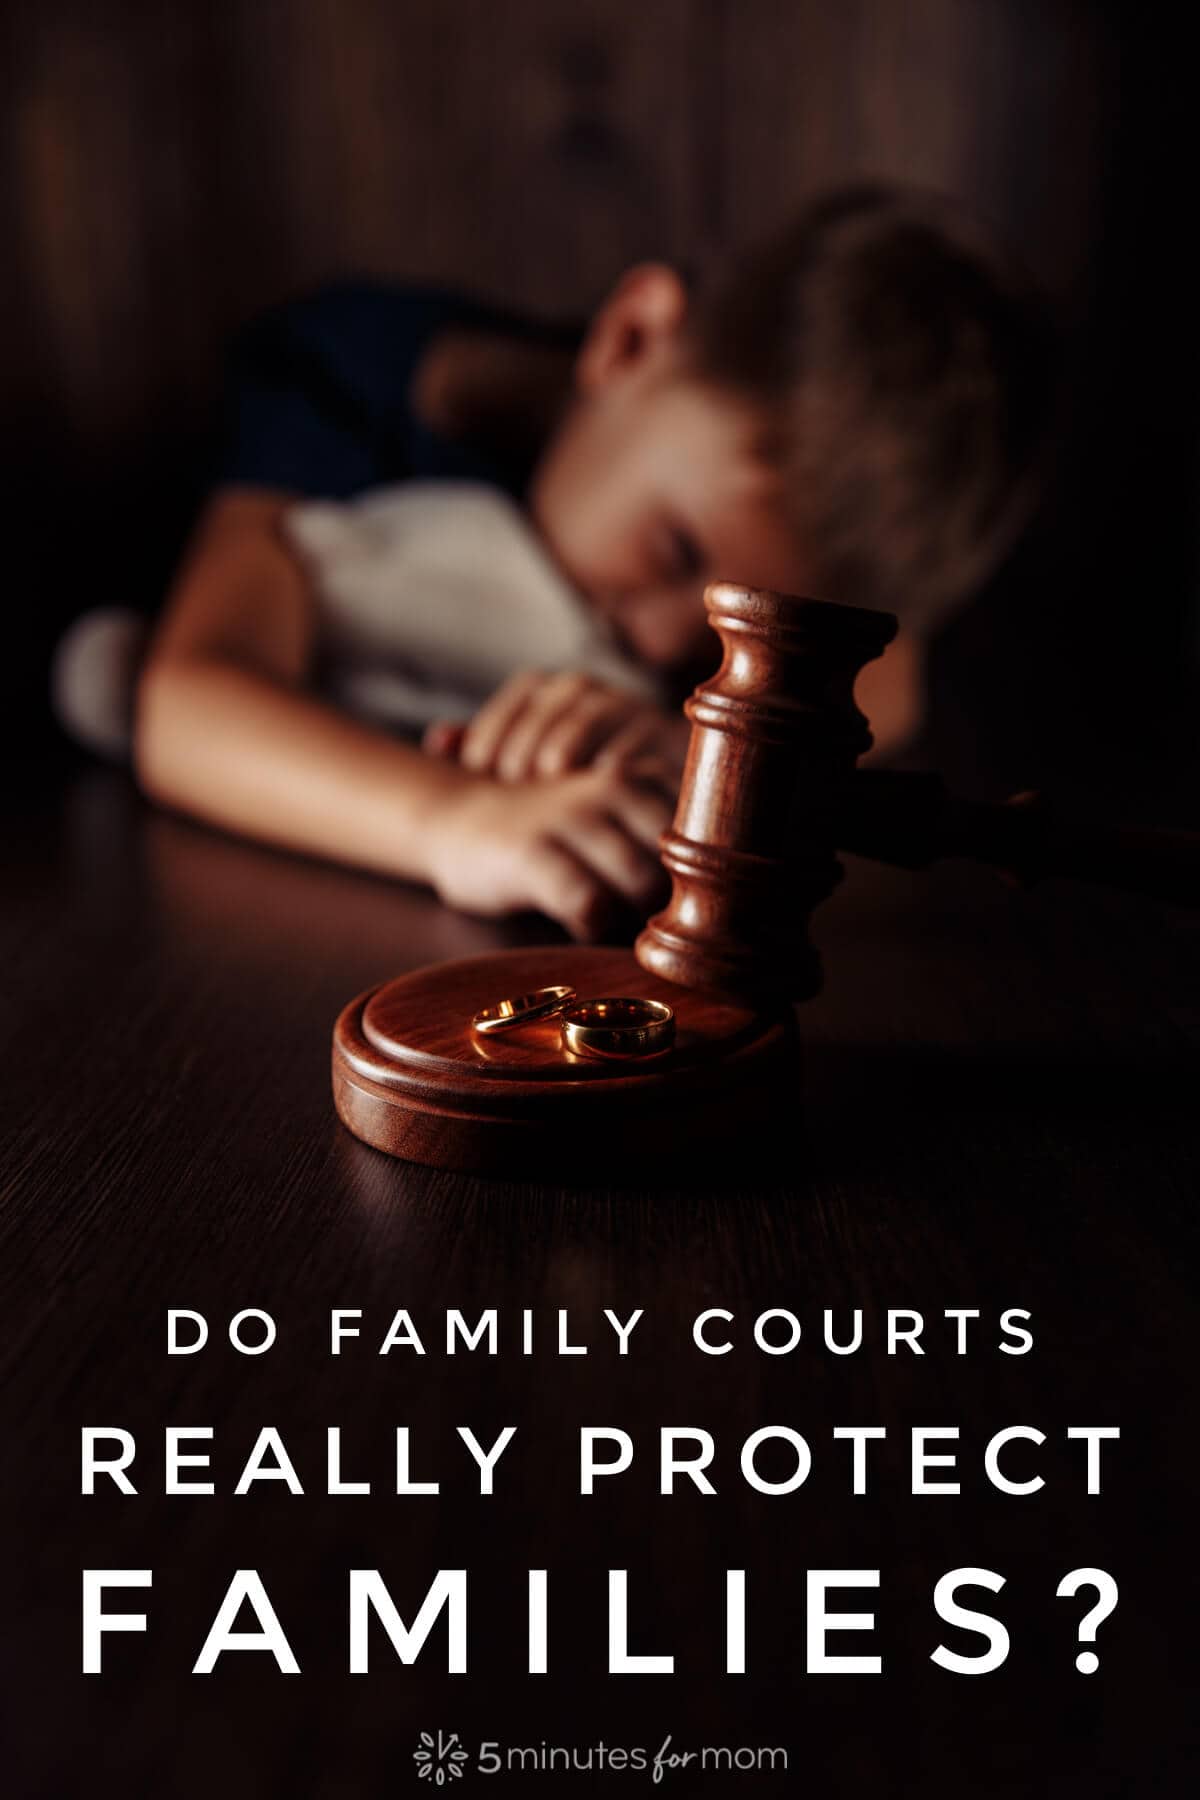 Young boy with teddy bear behind a court gavel - Text says "Do Family Courts Really Protect Families?"